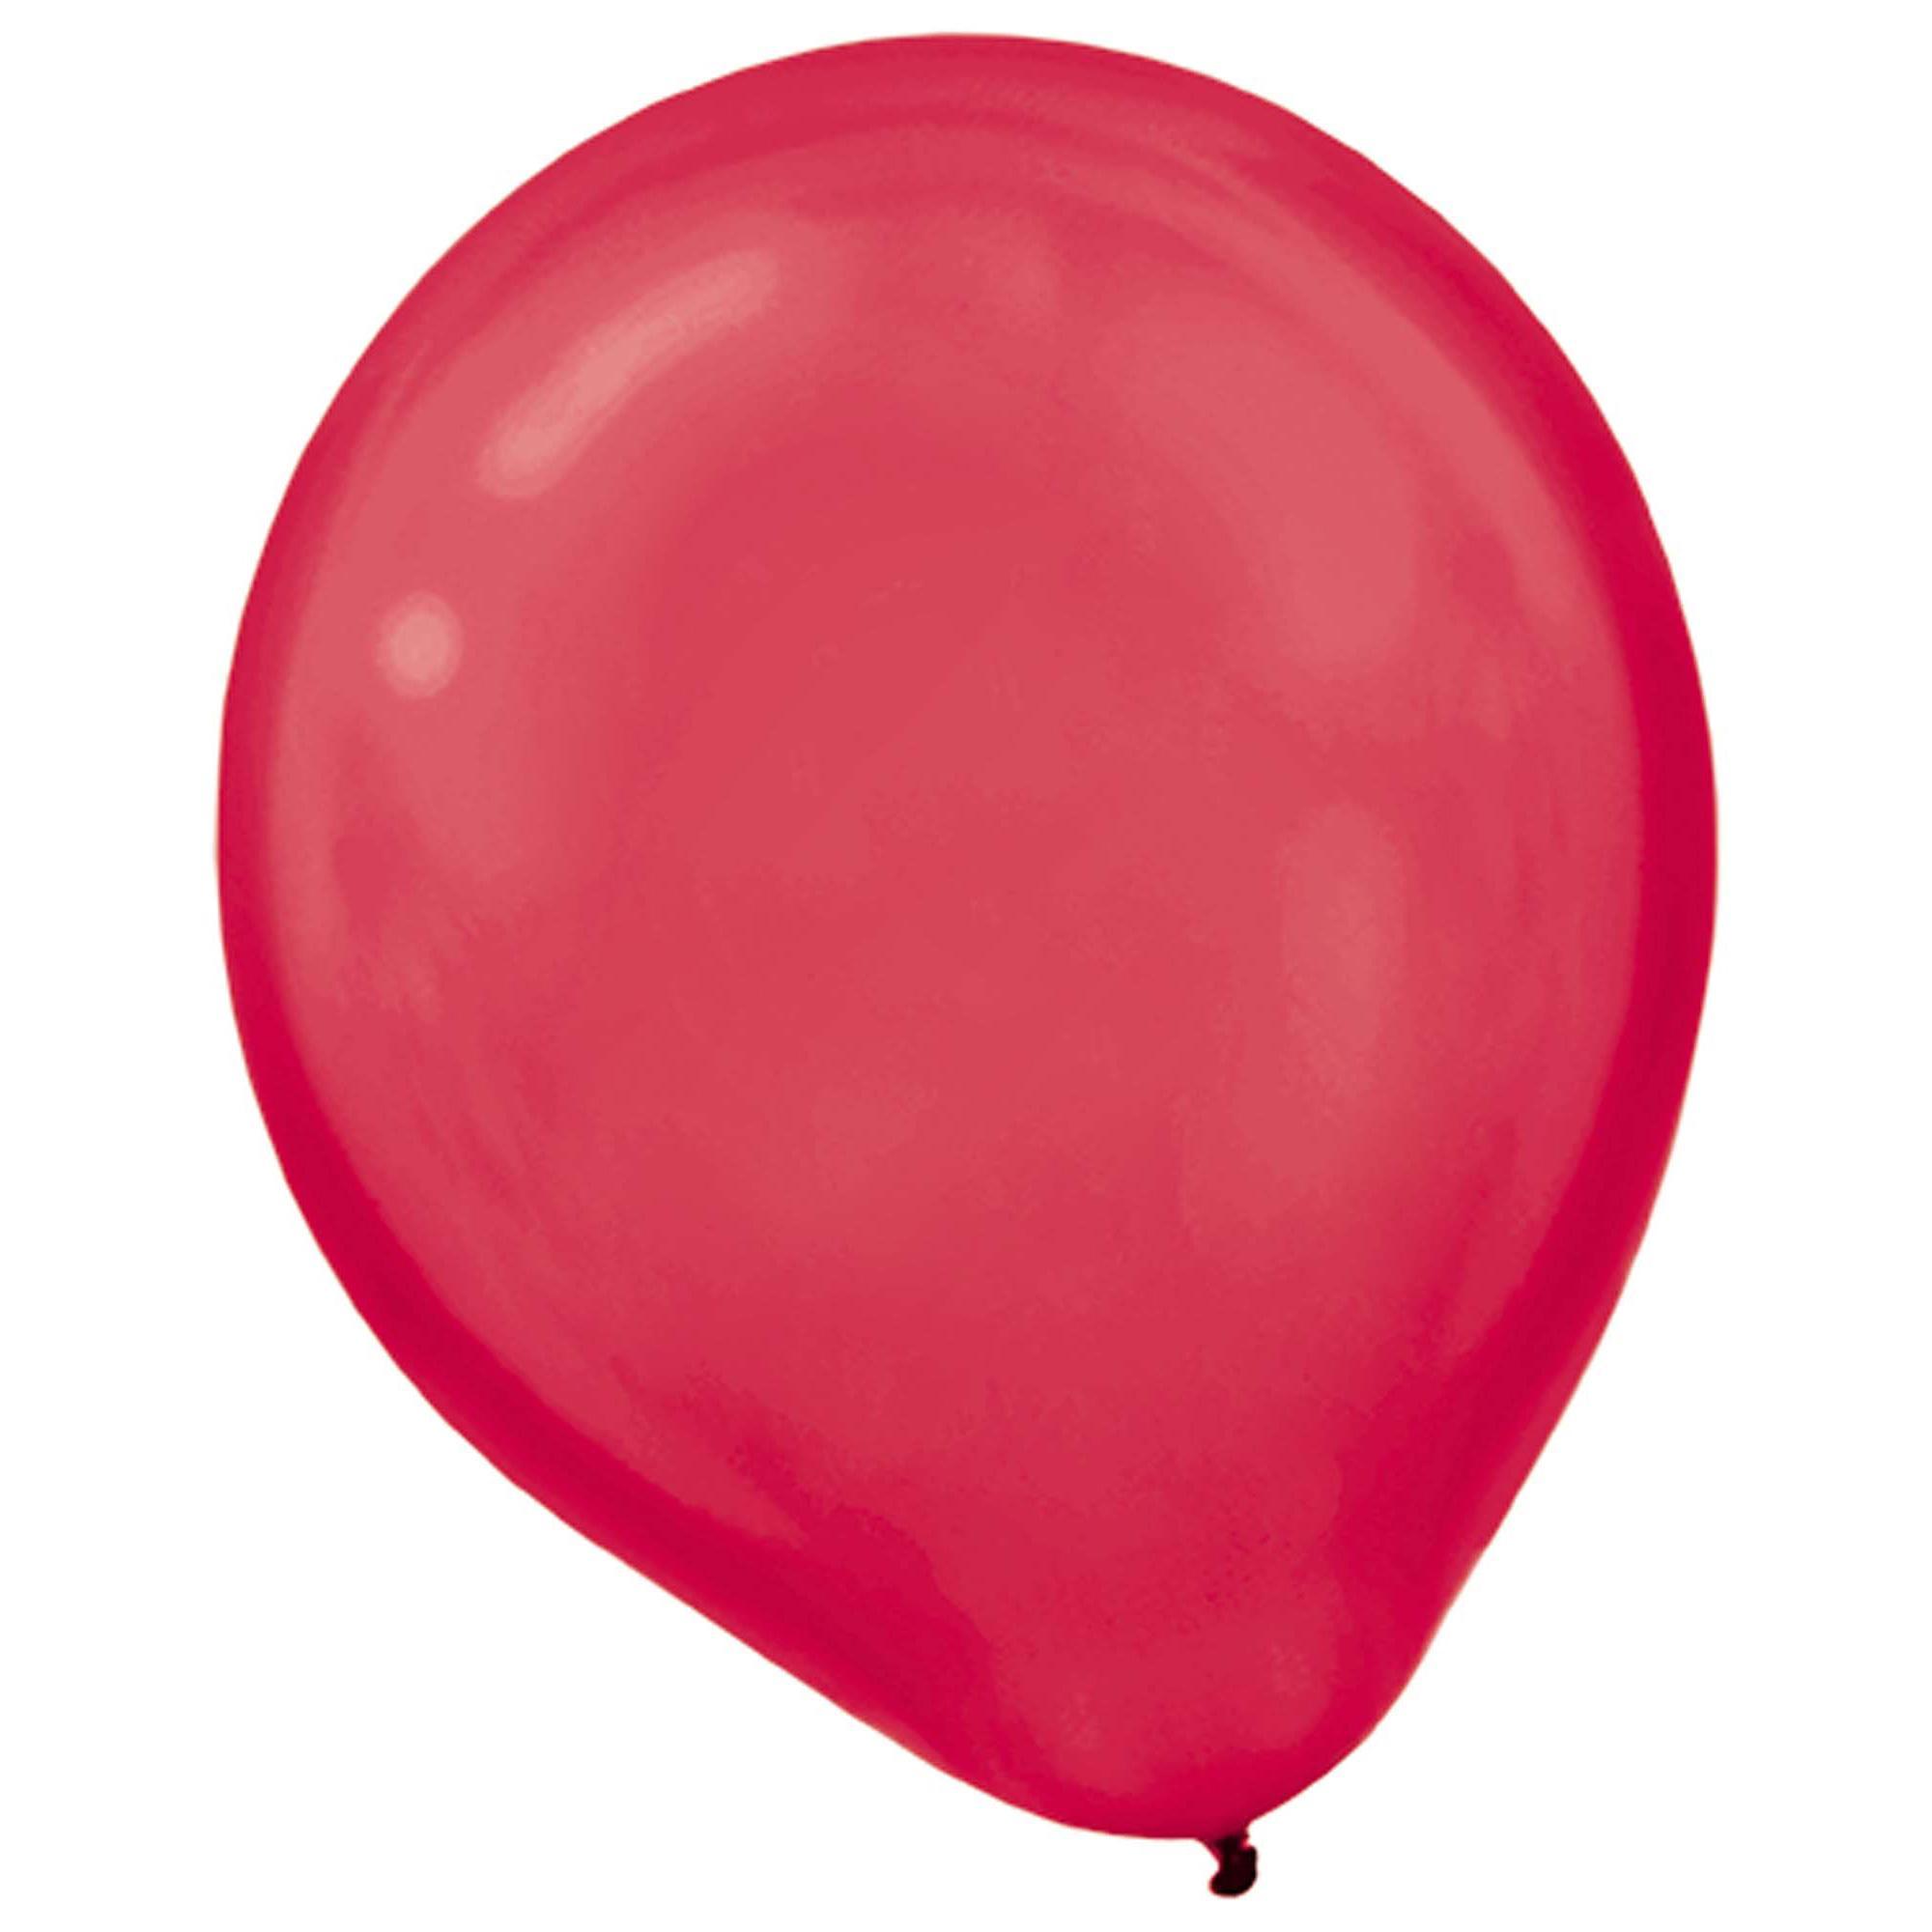 Metallic Red Latex Balloons 50pcs Balloons & Streamers - Party Centre